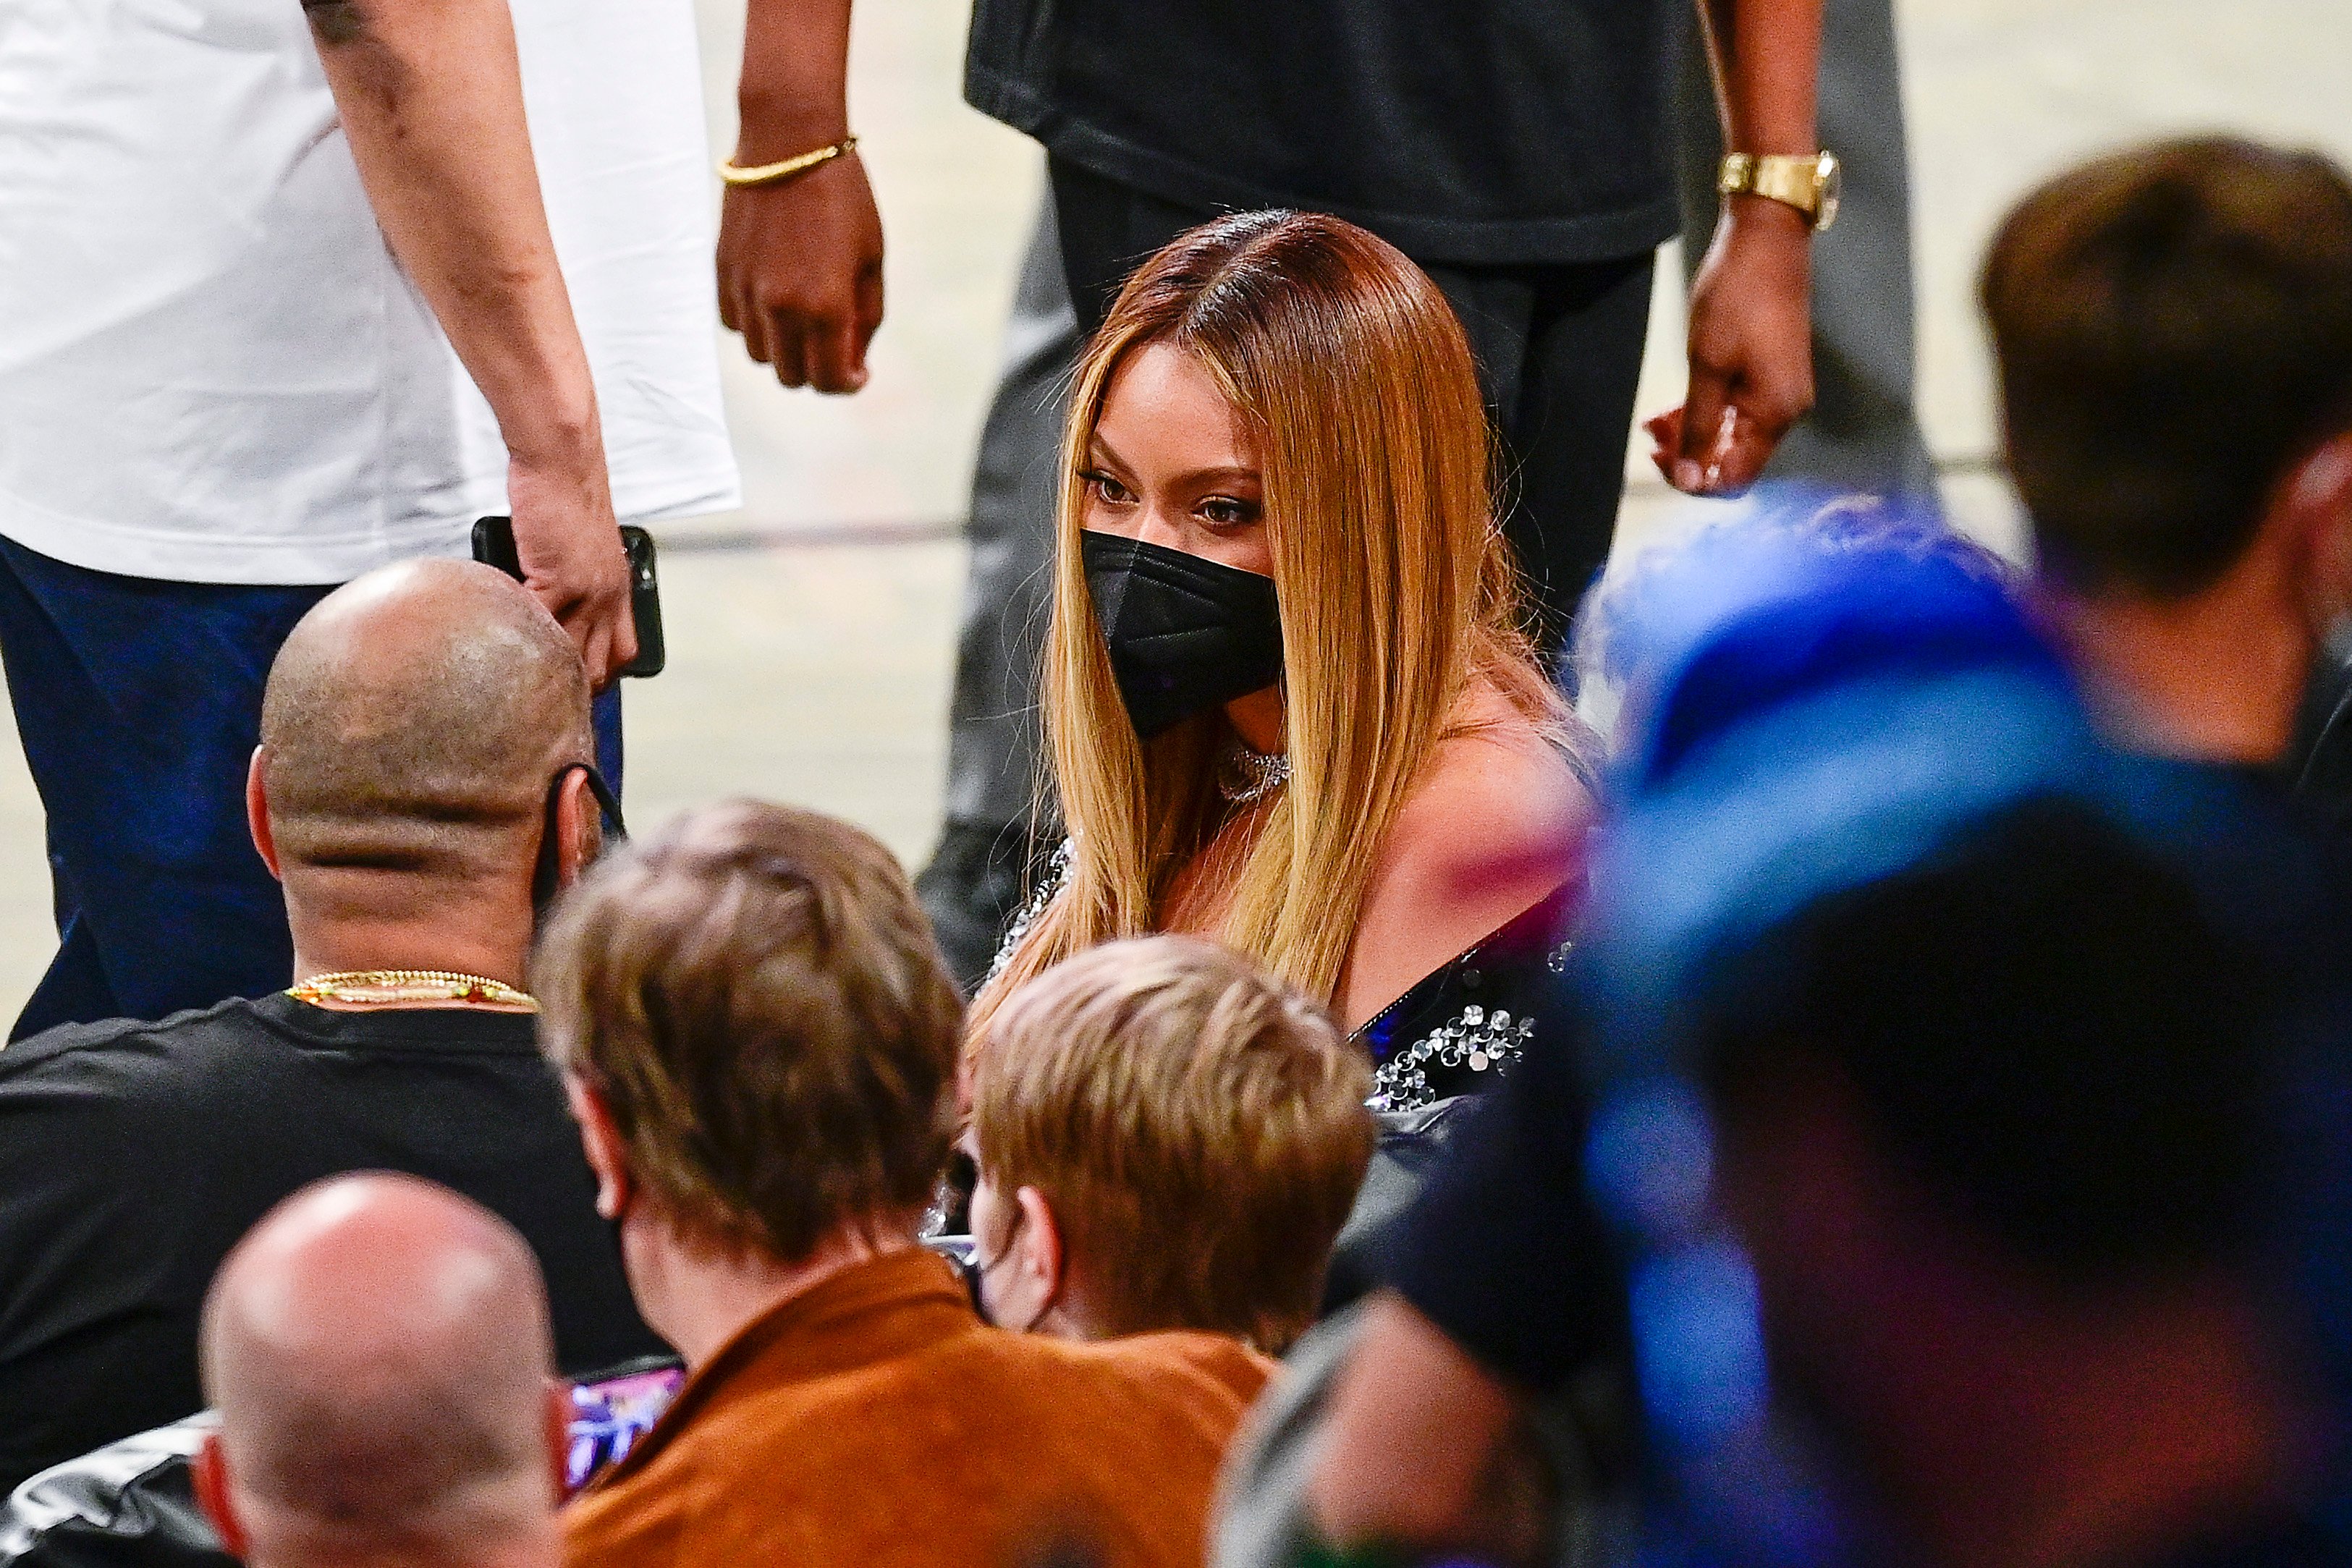 Singer Beyoncé attends Game One of the Second Round of the 2021 NBA Playoffs between the Brooklyn Nets and the Milwaukee Bucks at Barclays Center